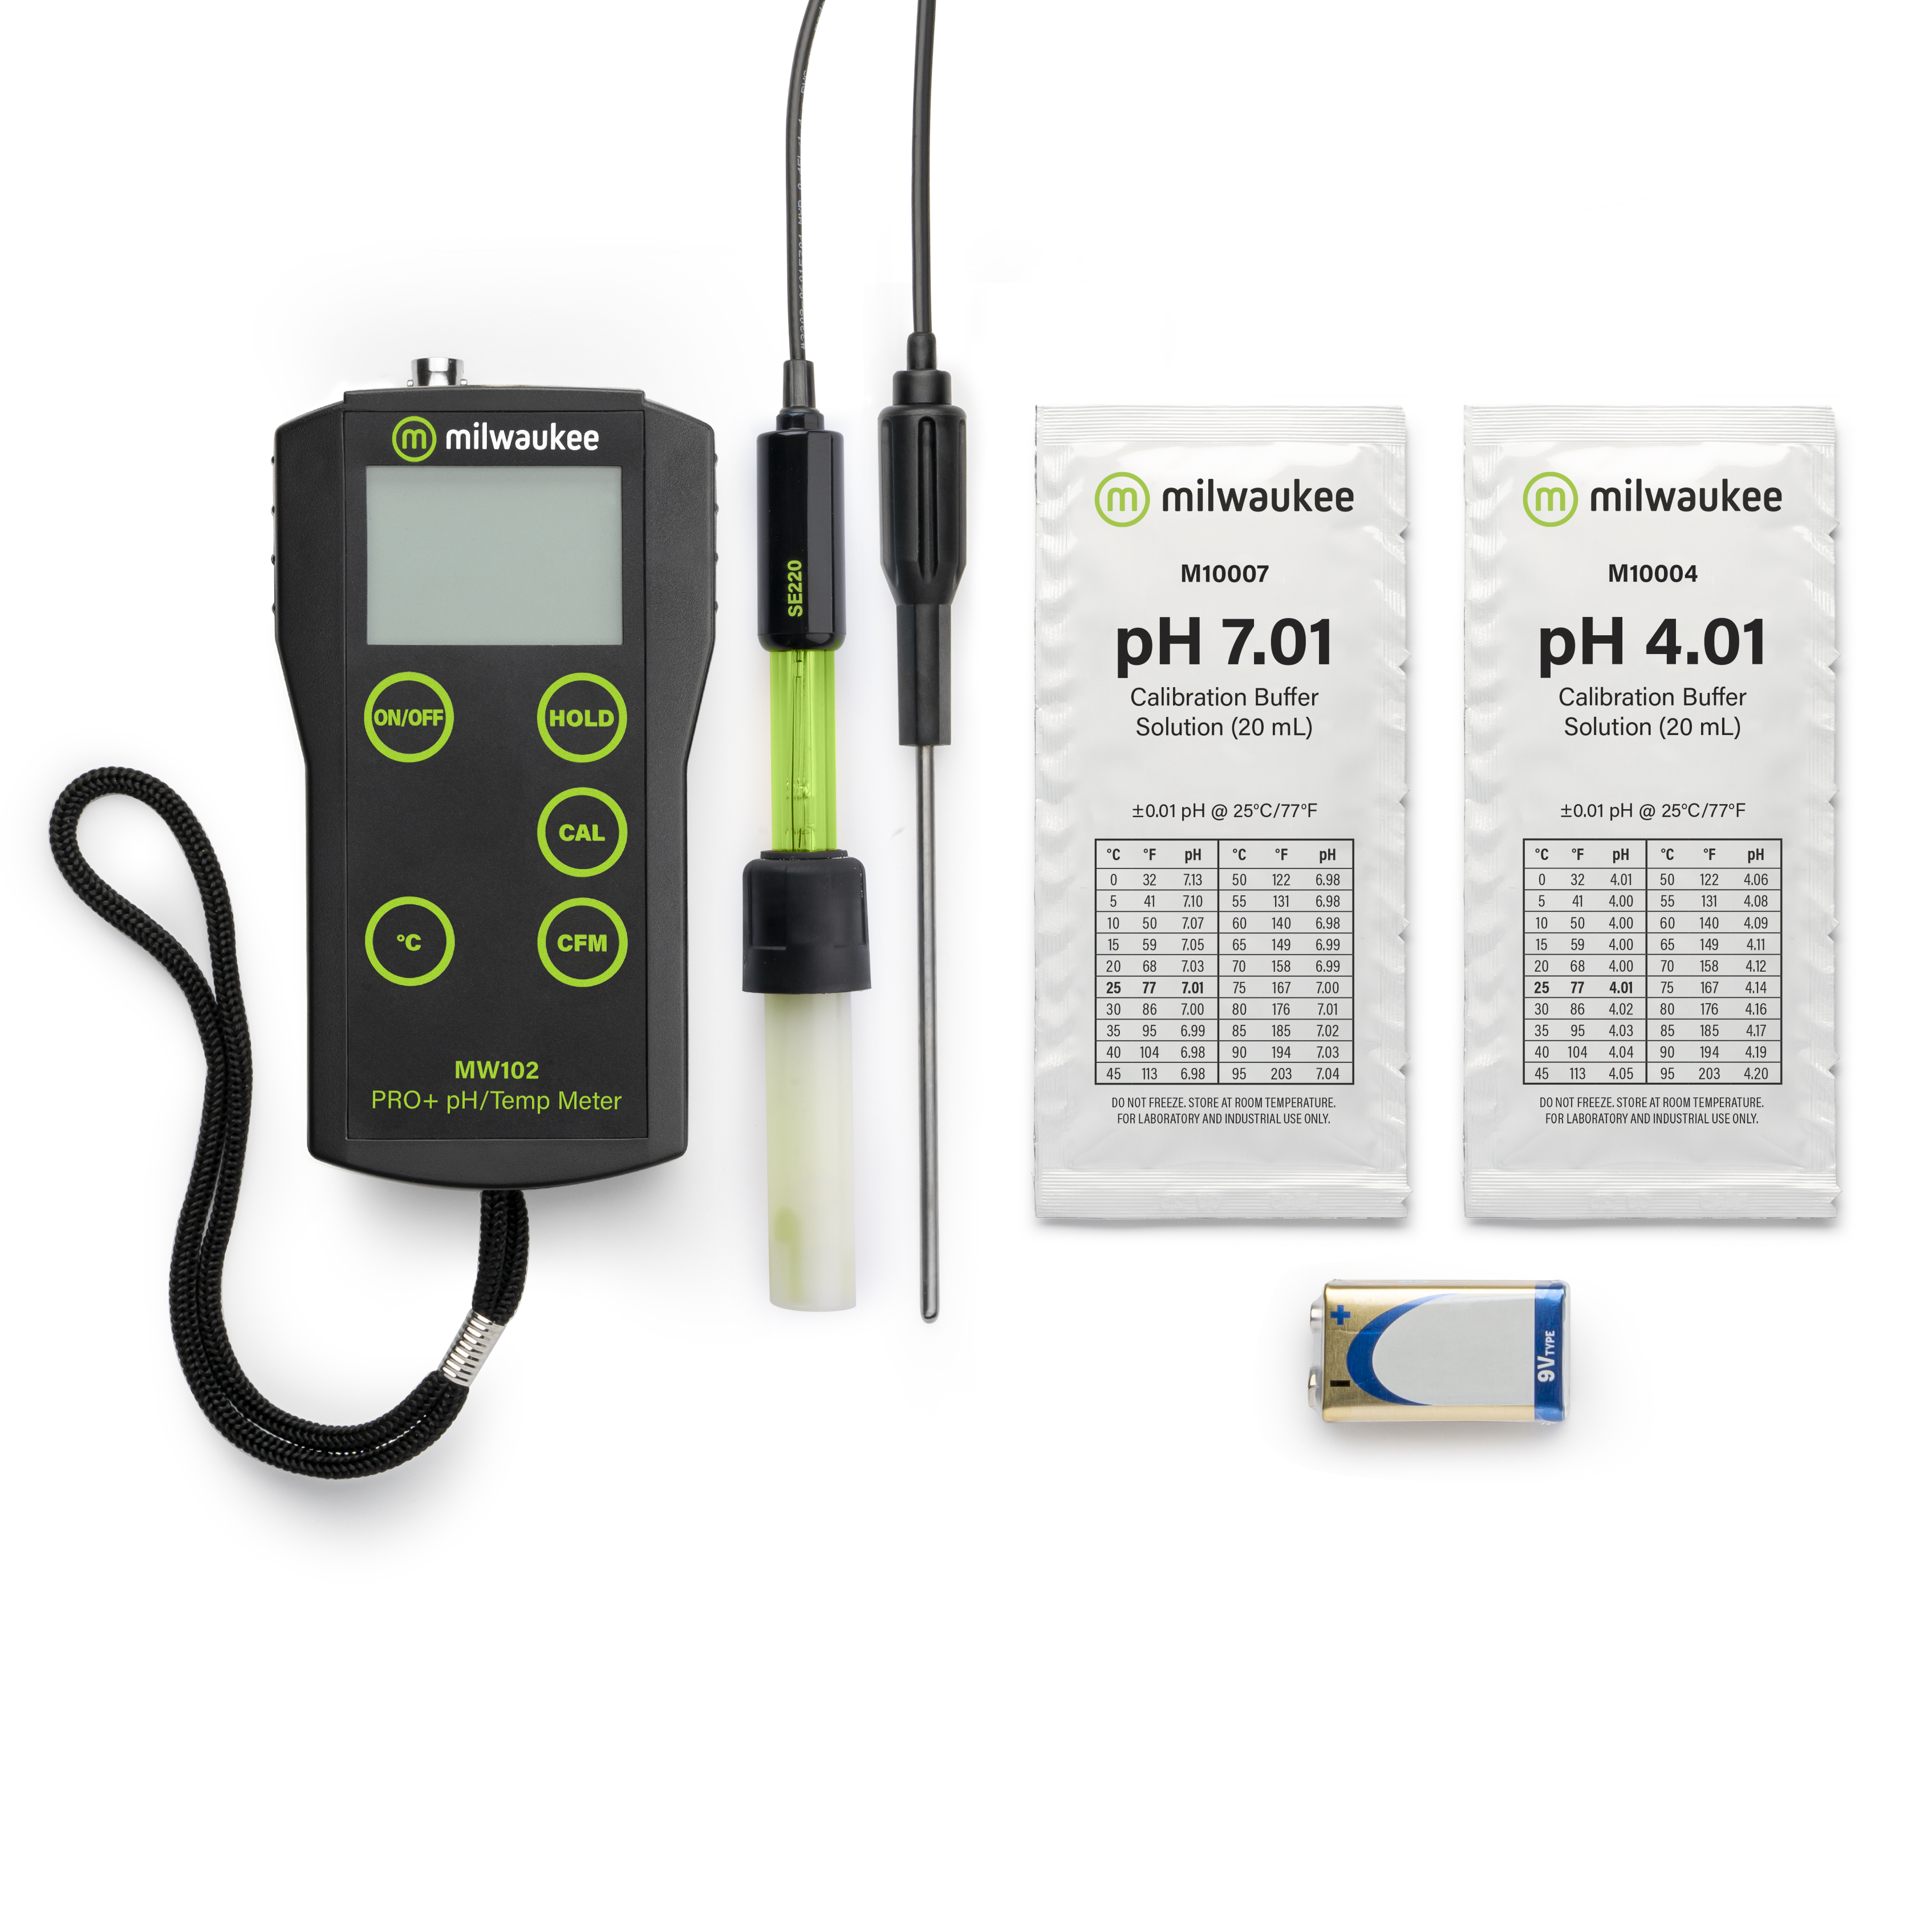 Milwaukee MW102 PRO+ portable pH/temperature meter for fast and reliable results